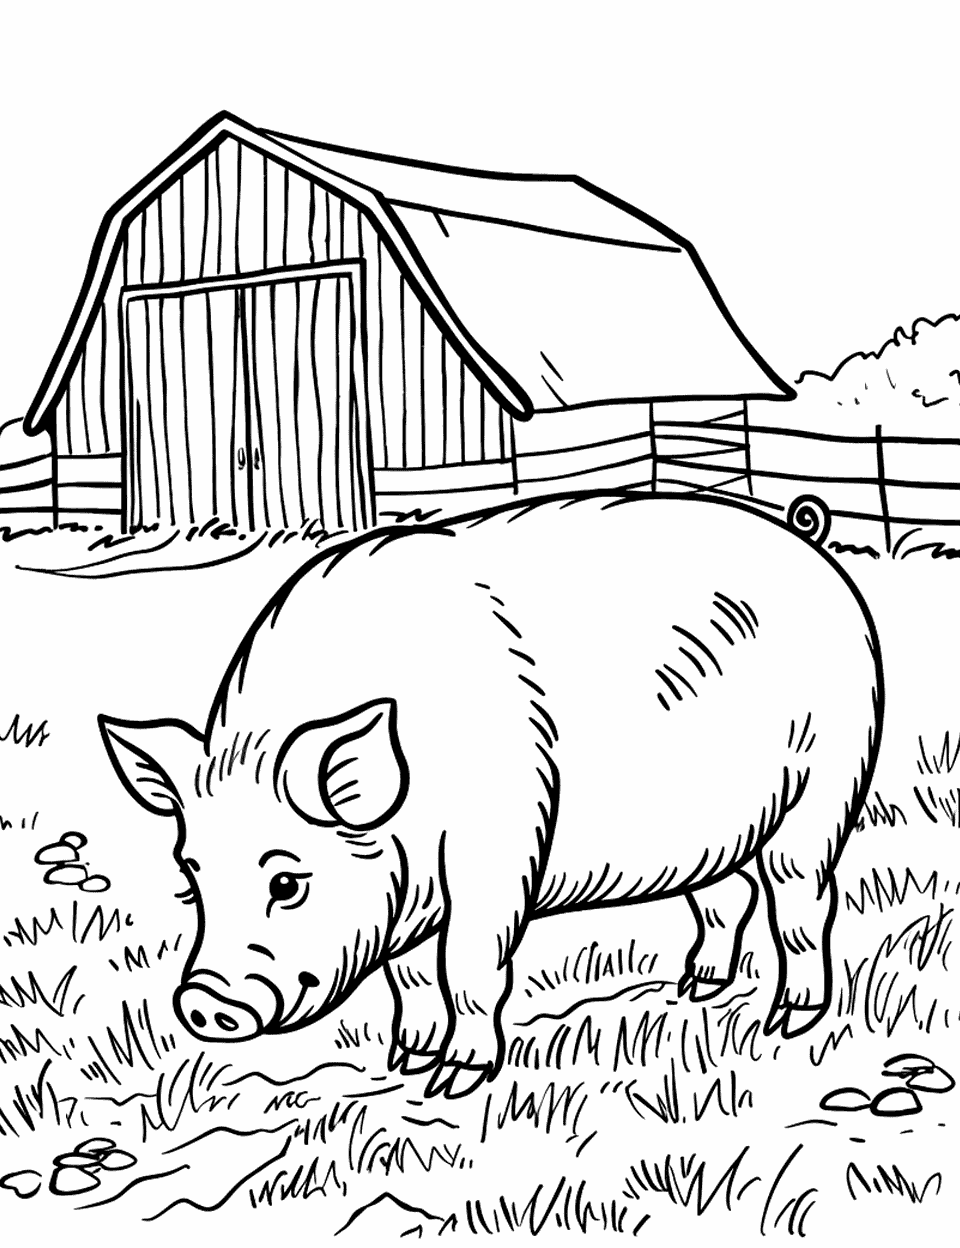 Pig Sniffing Around a Barn Farm Animal Coloring Page - A pig with its nose to the ground, sniffing around the outside of a barn.